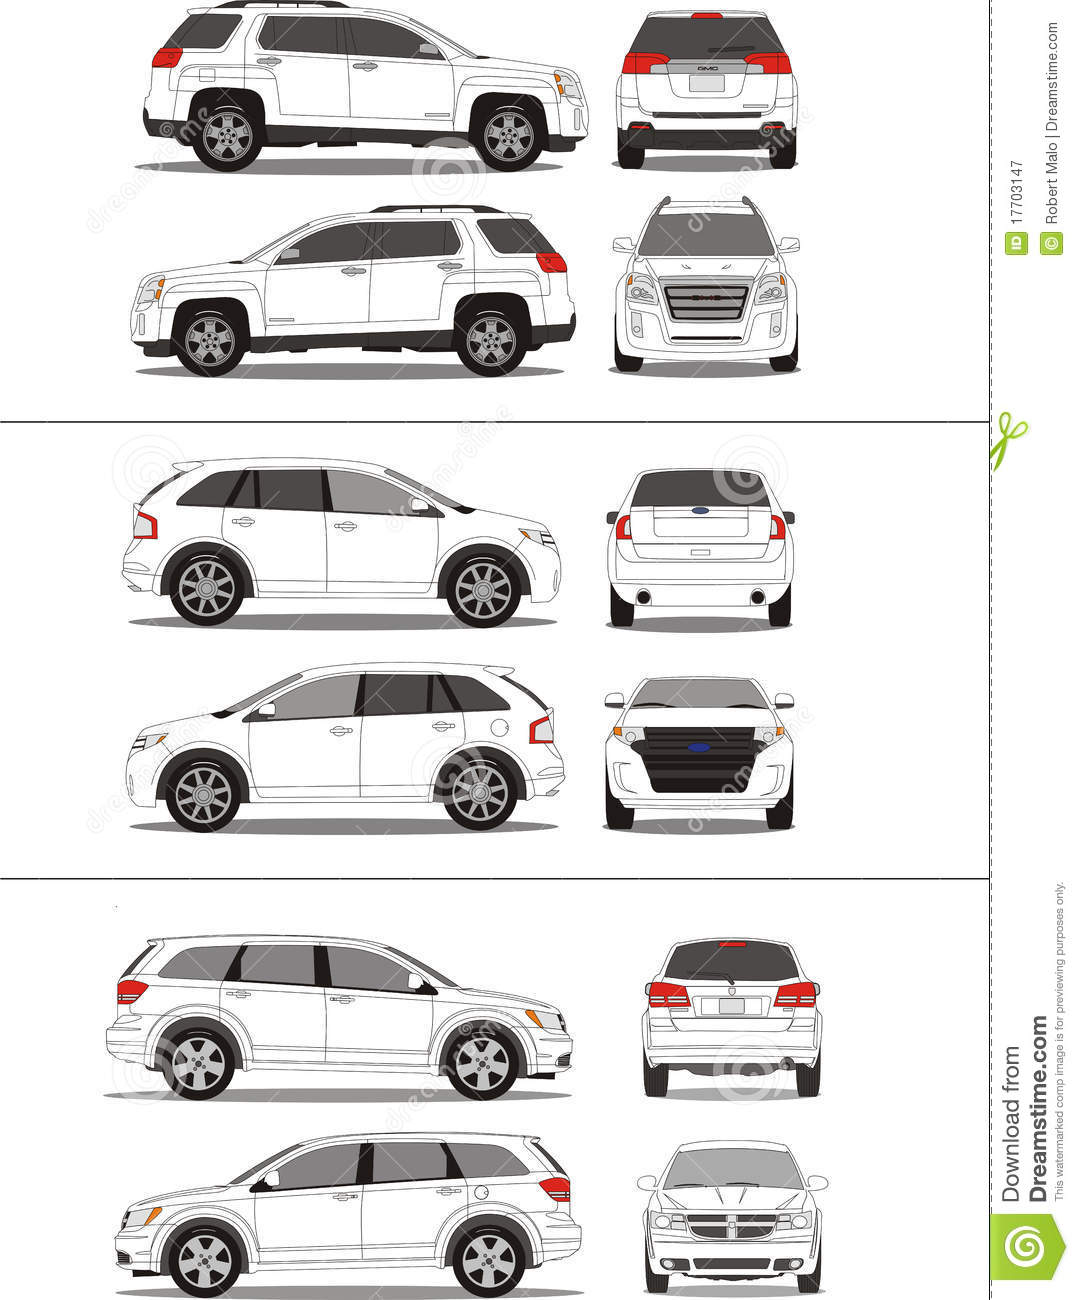 Vehicle outlines free vector